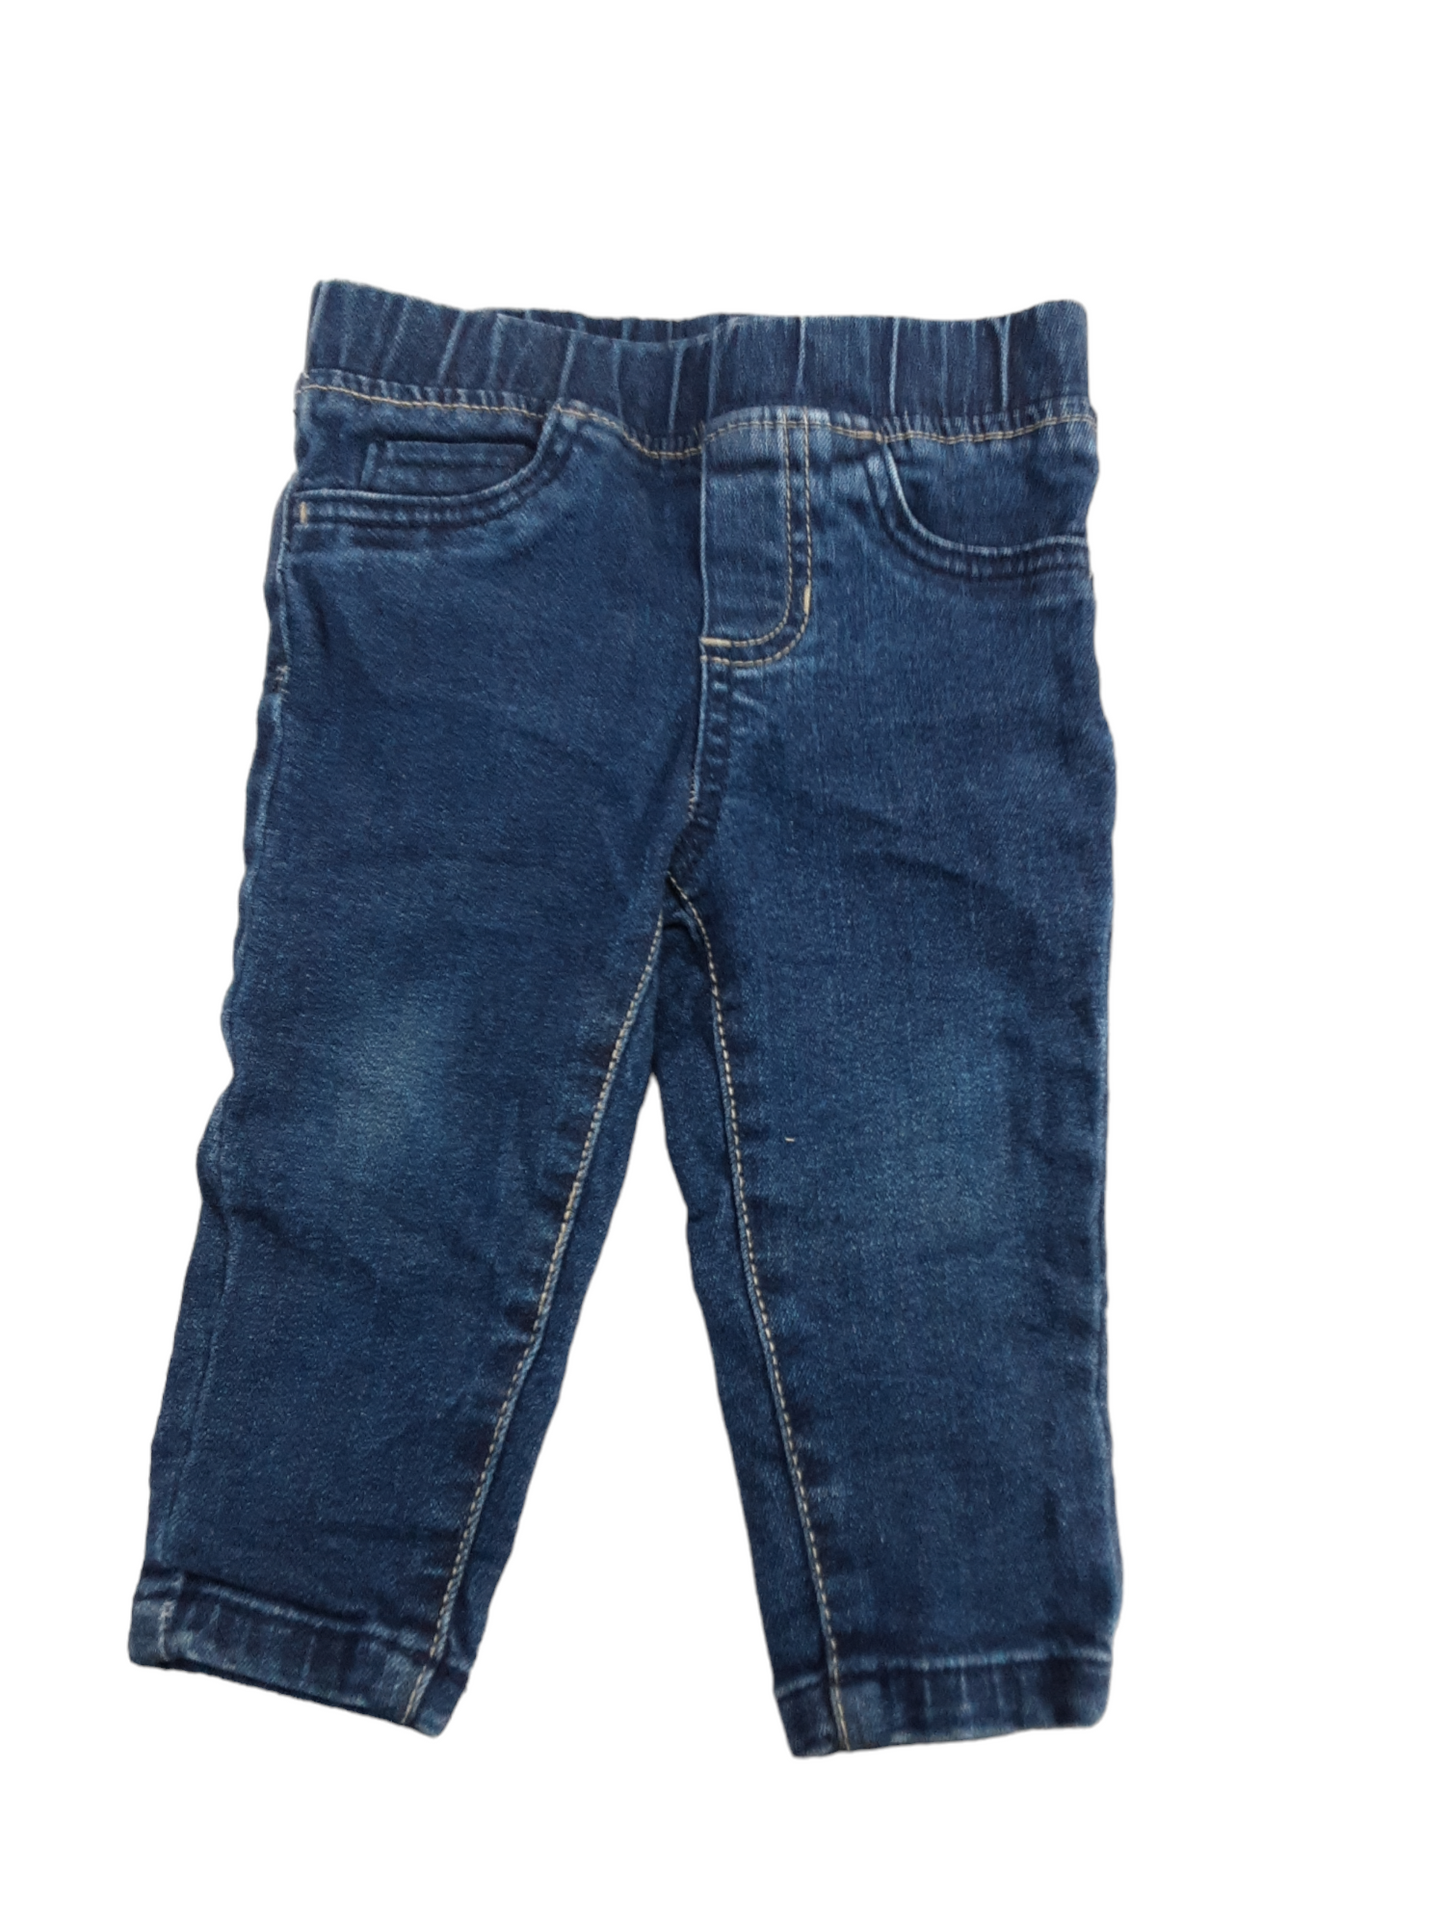 Pull on denims size 12months